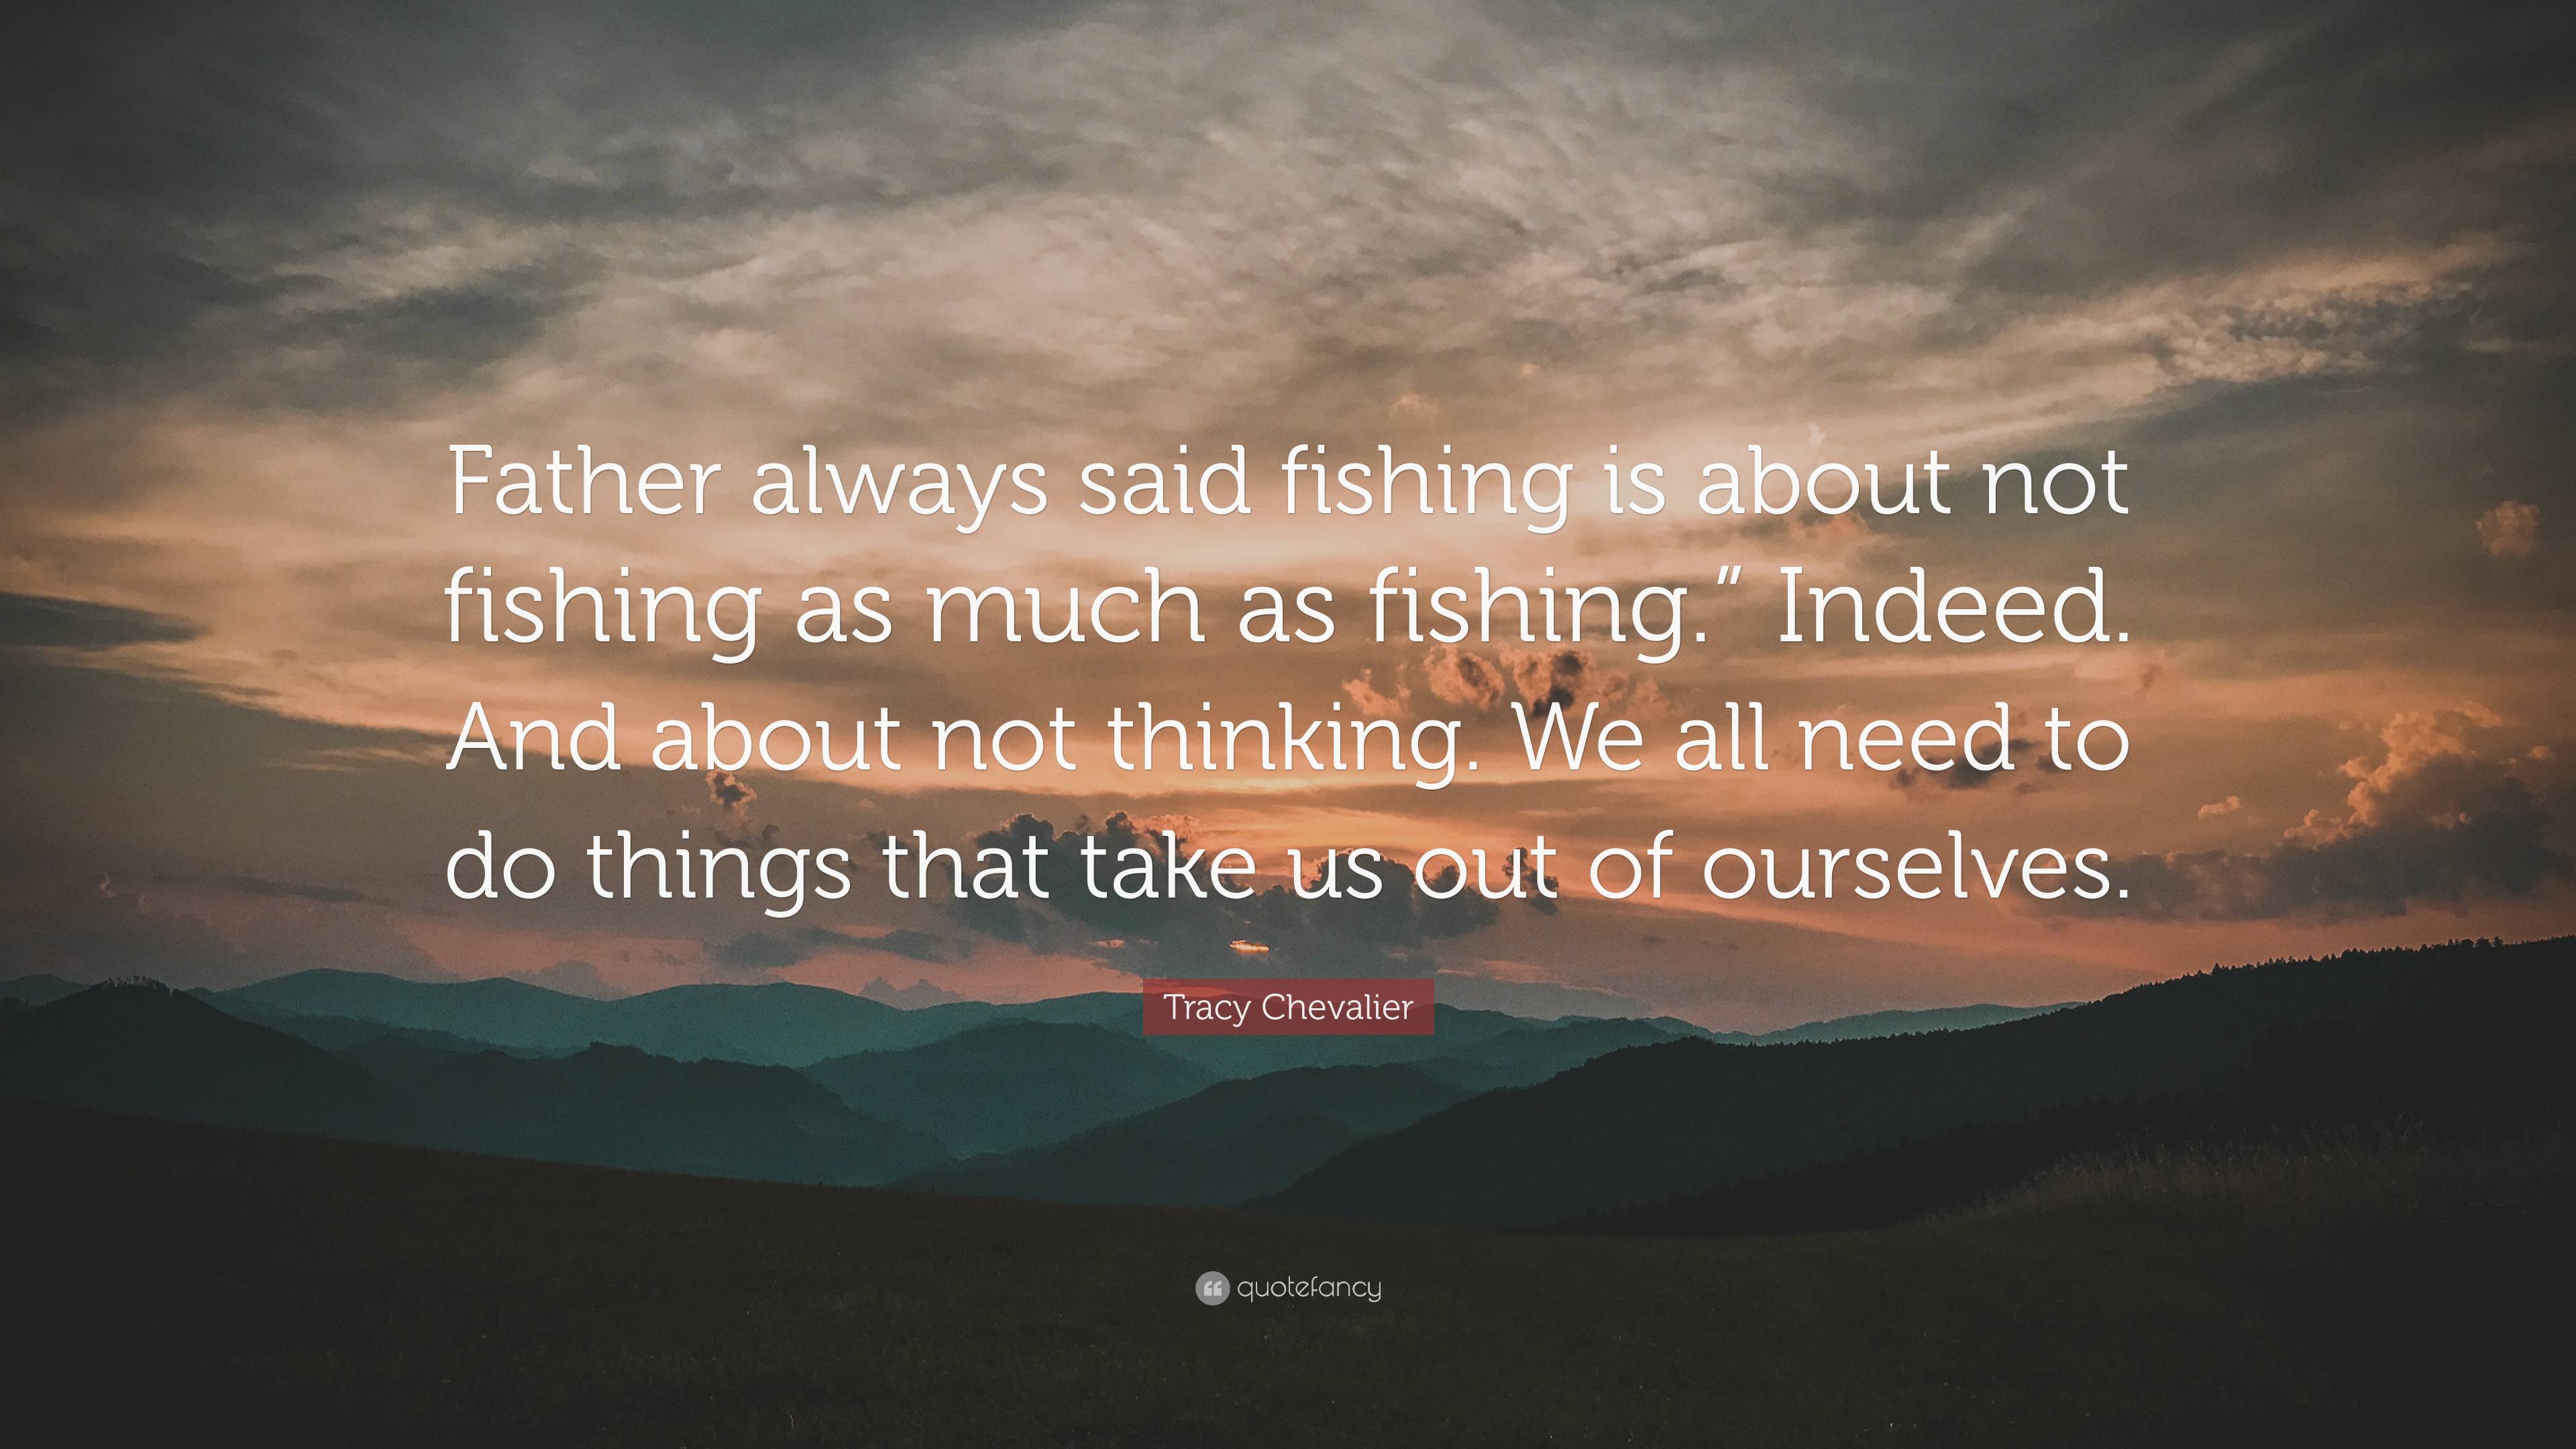 https://quotefancy.com/media/wallpaper/3840x2160/7625774-Tracy-Chevalier-Quote-Father-always-said-fishing-is-about-not.jpg